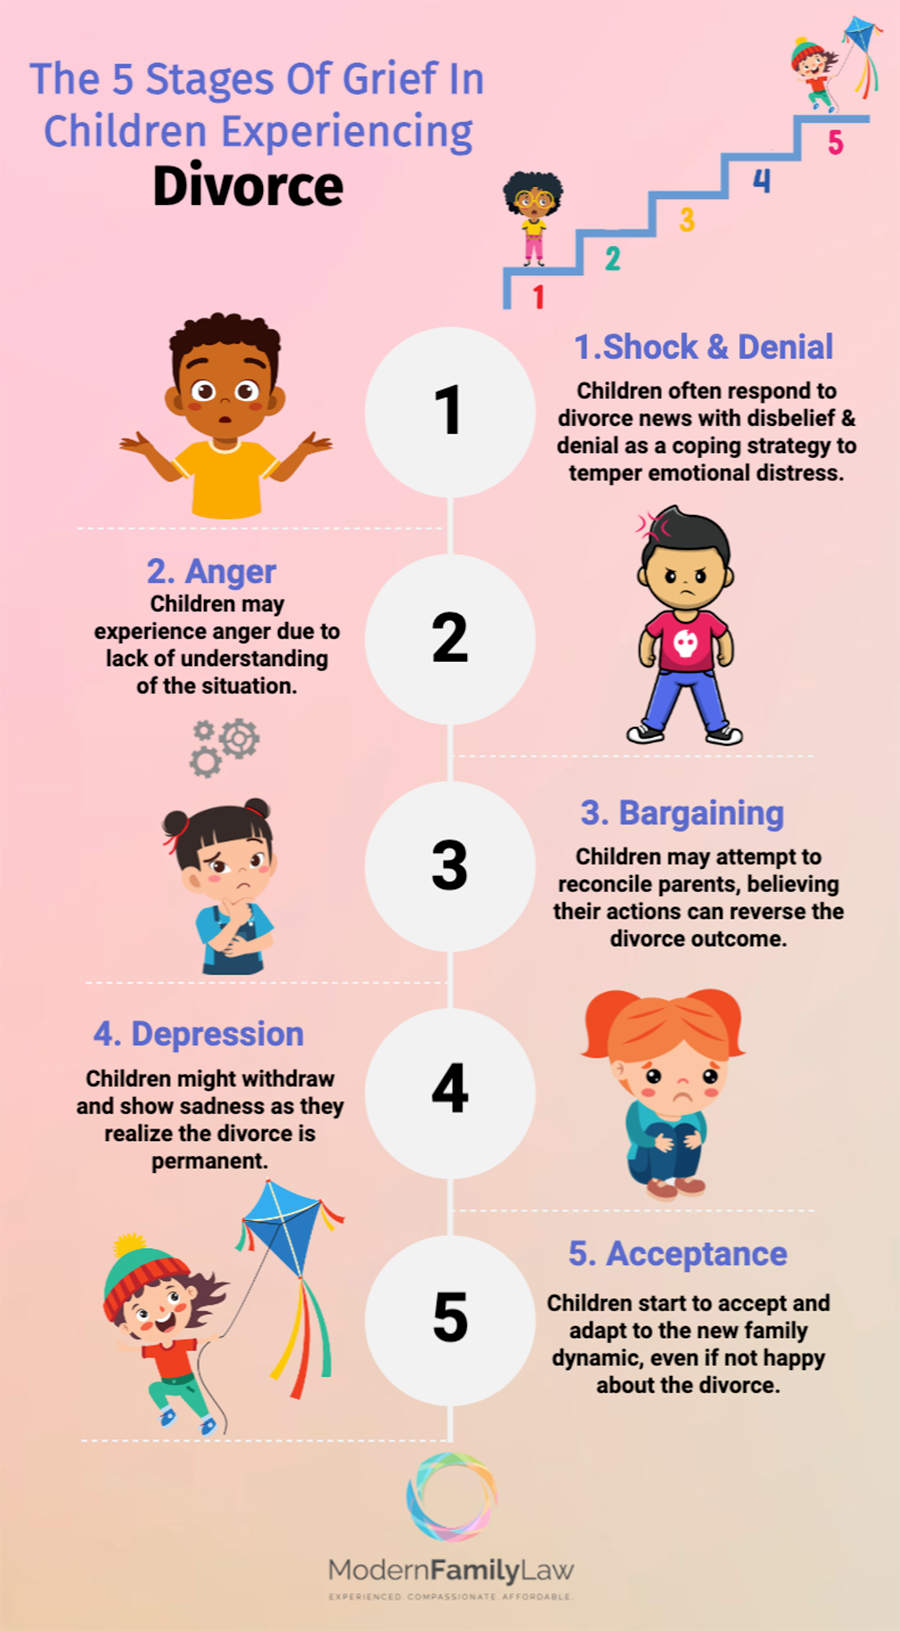 an understanding of the 5 stages of divorce grieving experience by children